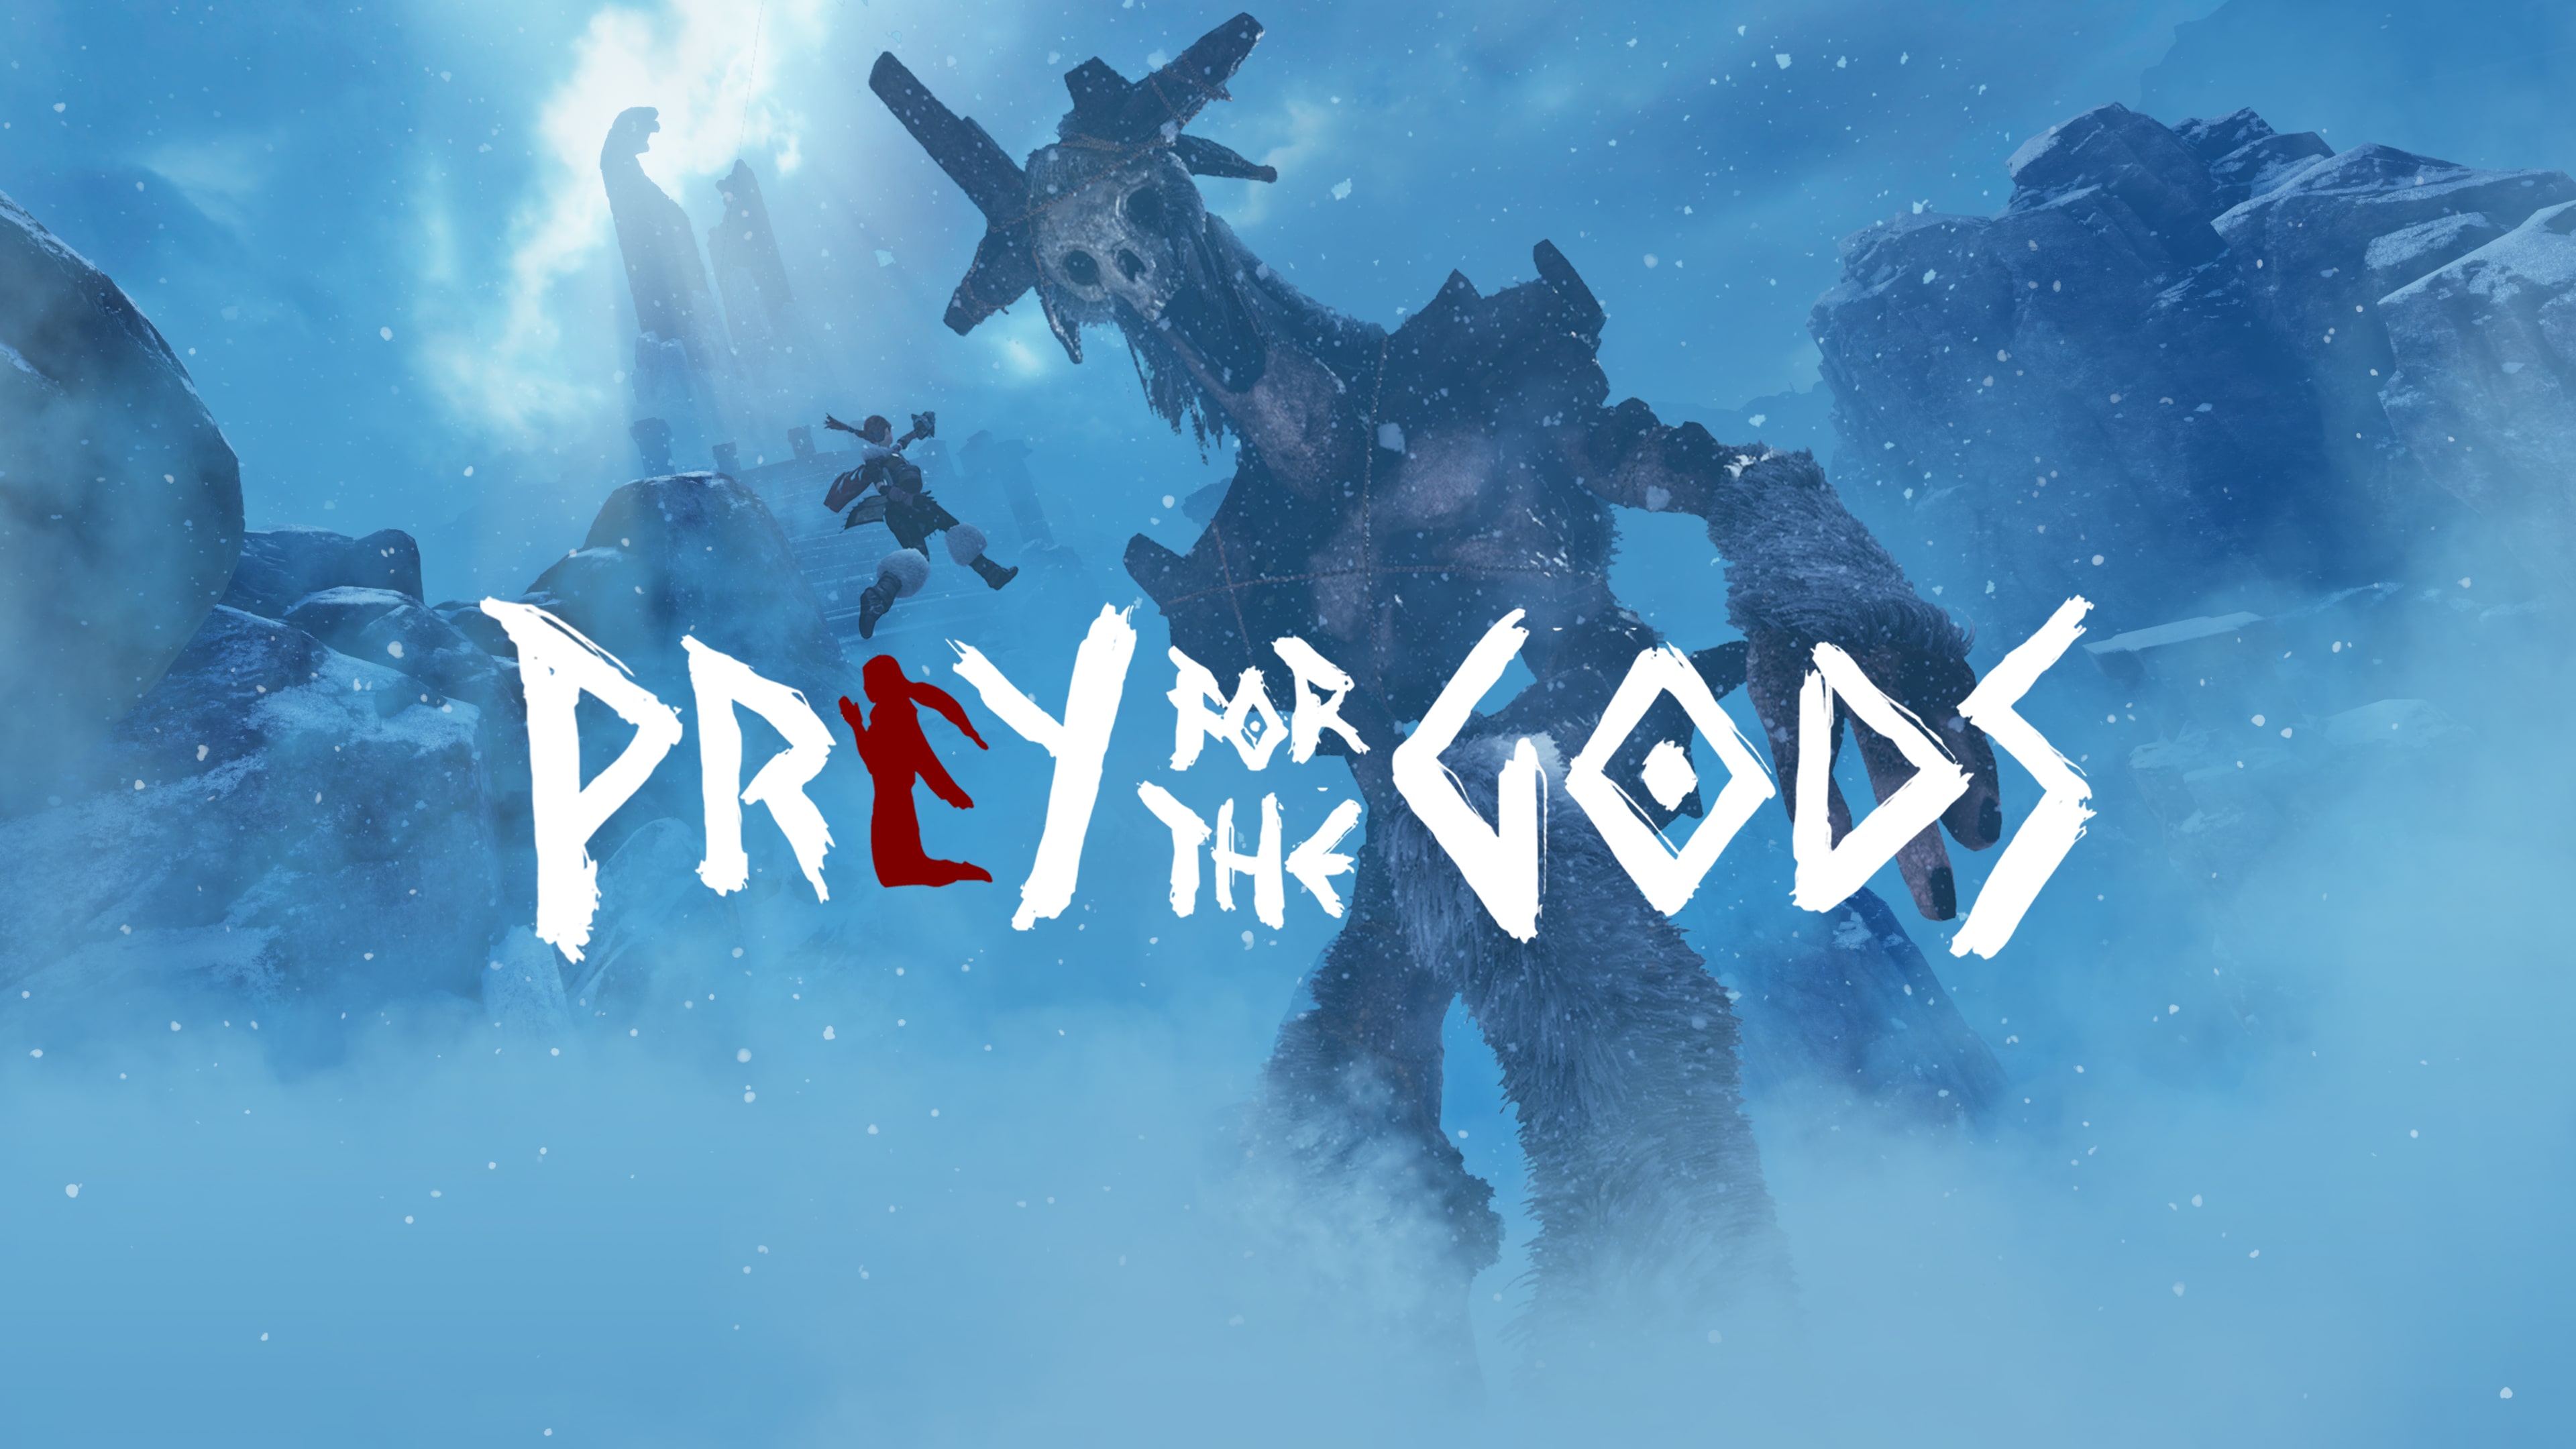 PRAEY FOR THE GODS (Simplified Chinese, English, Korean, Japanese, Traditional Chinese)